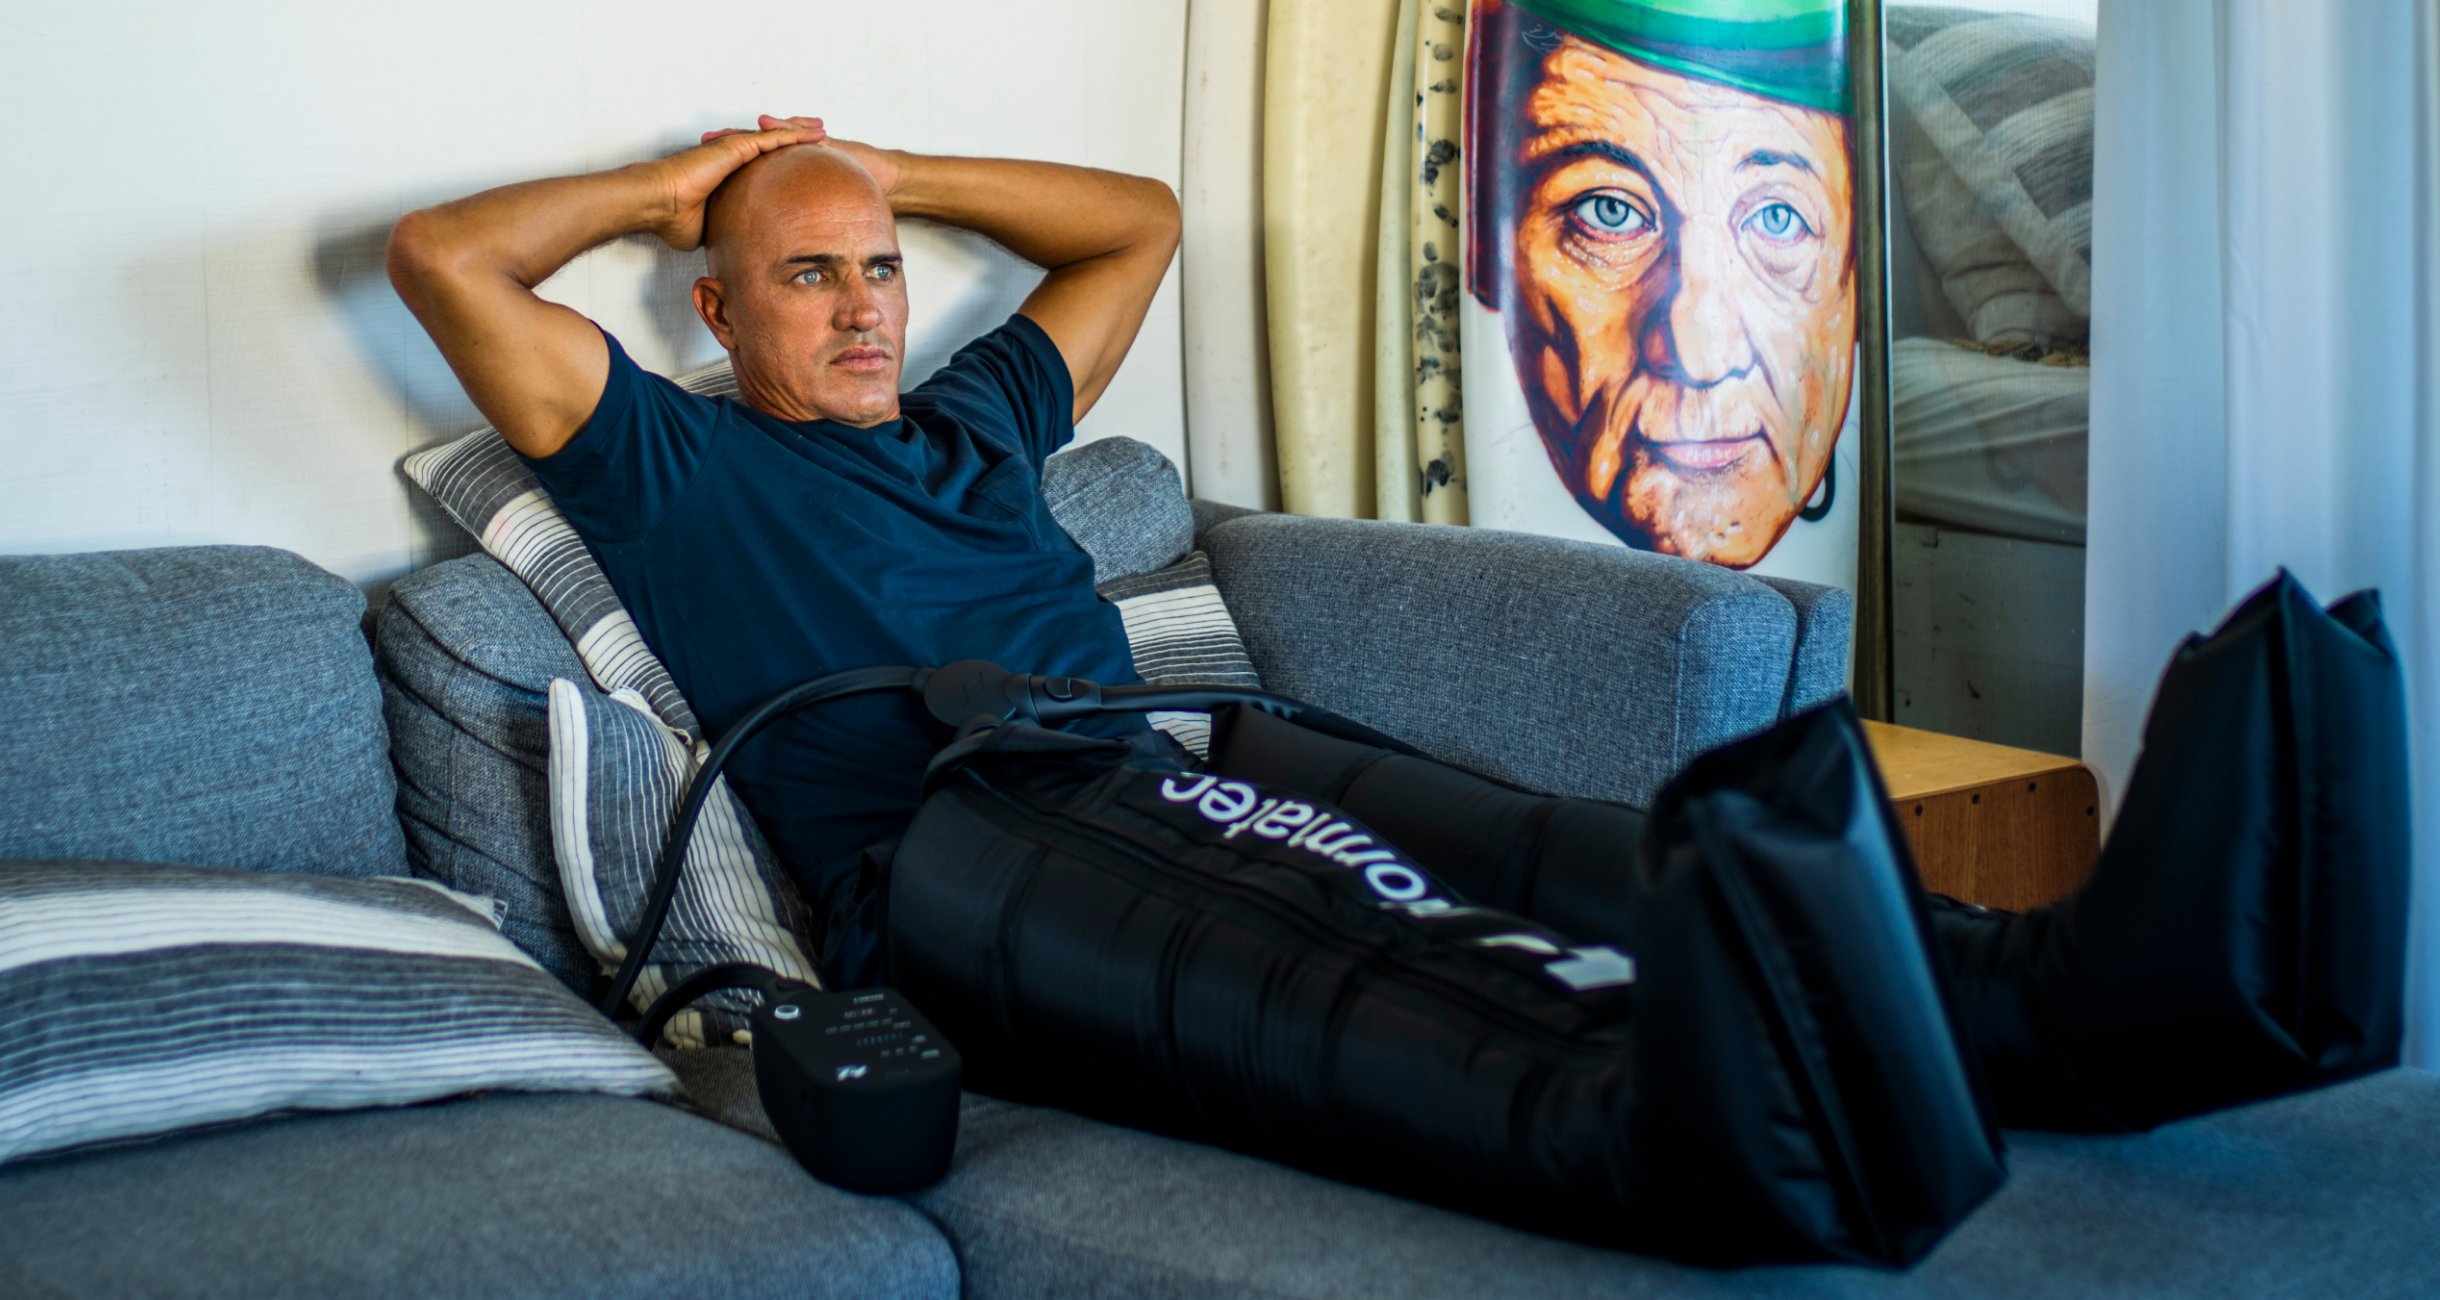 Normatec on the Go: Compression Therapy for 'Heart of the Lower Body